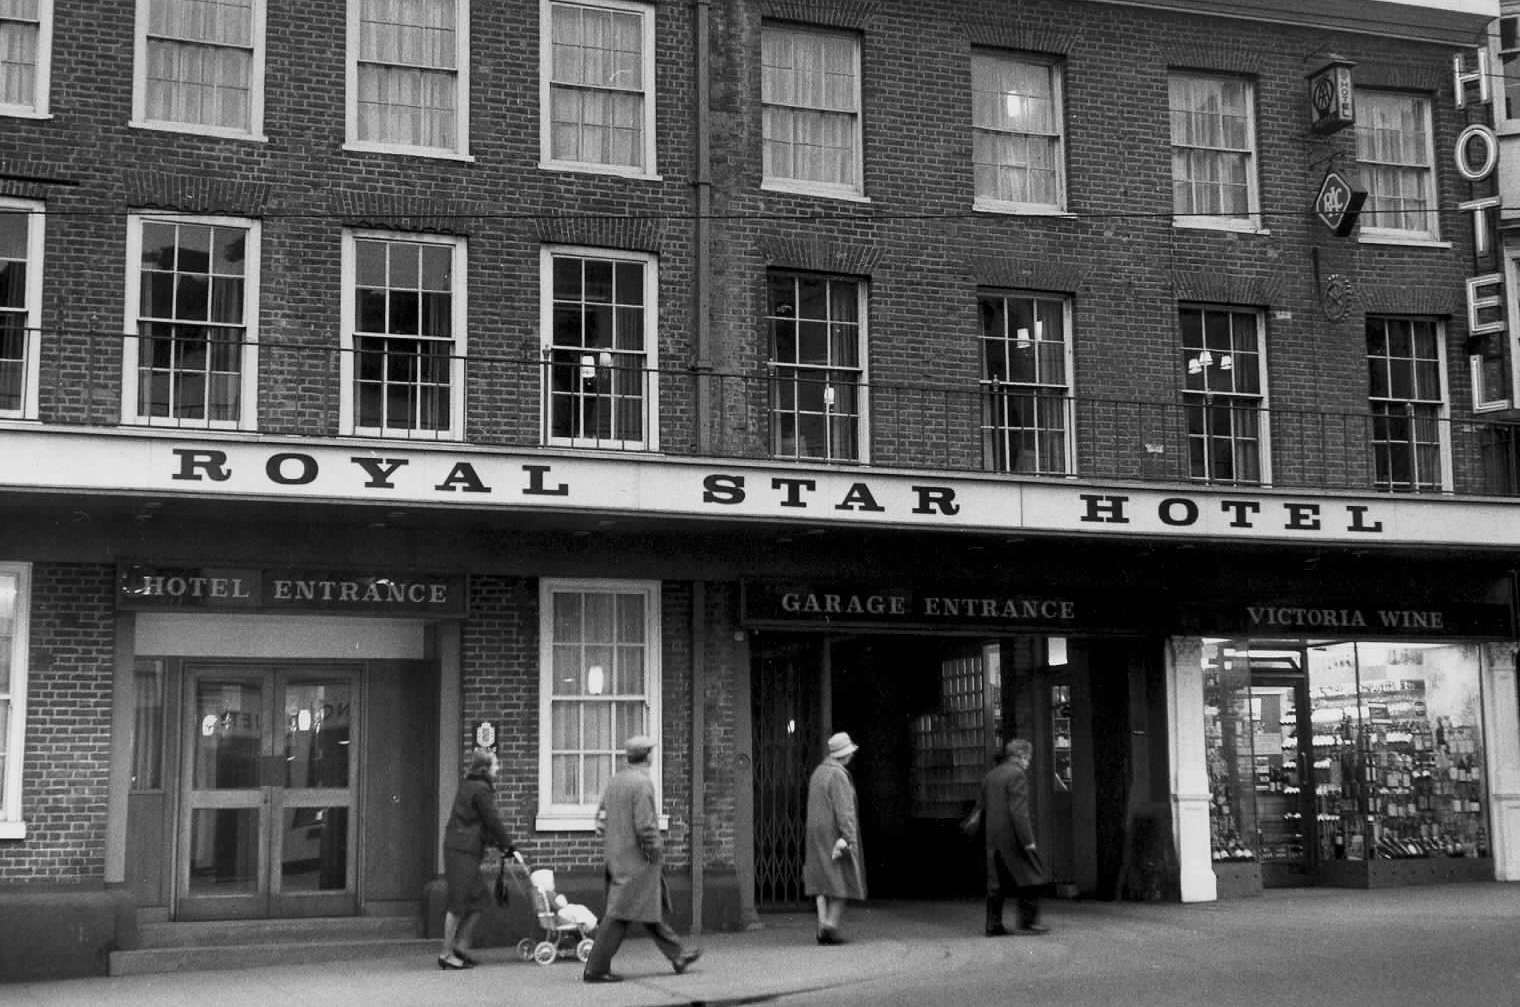 The Royal Star Hotel in Maidstone – now a shopping centre